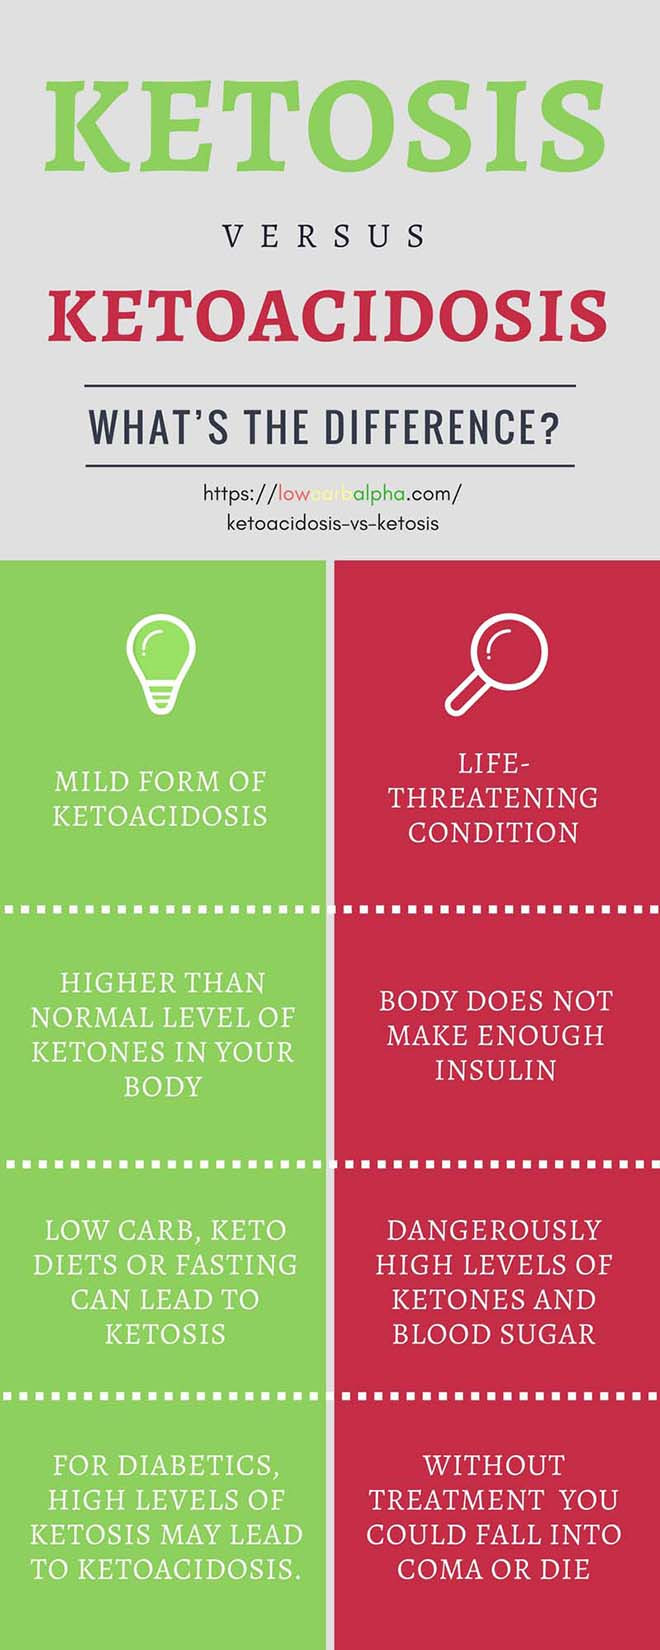 Keto Diet Danger
 Ketoacidosis vs Ketosis What s the Difference